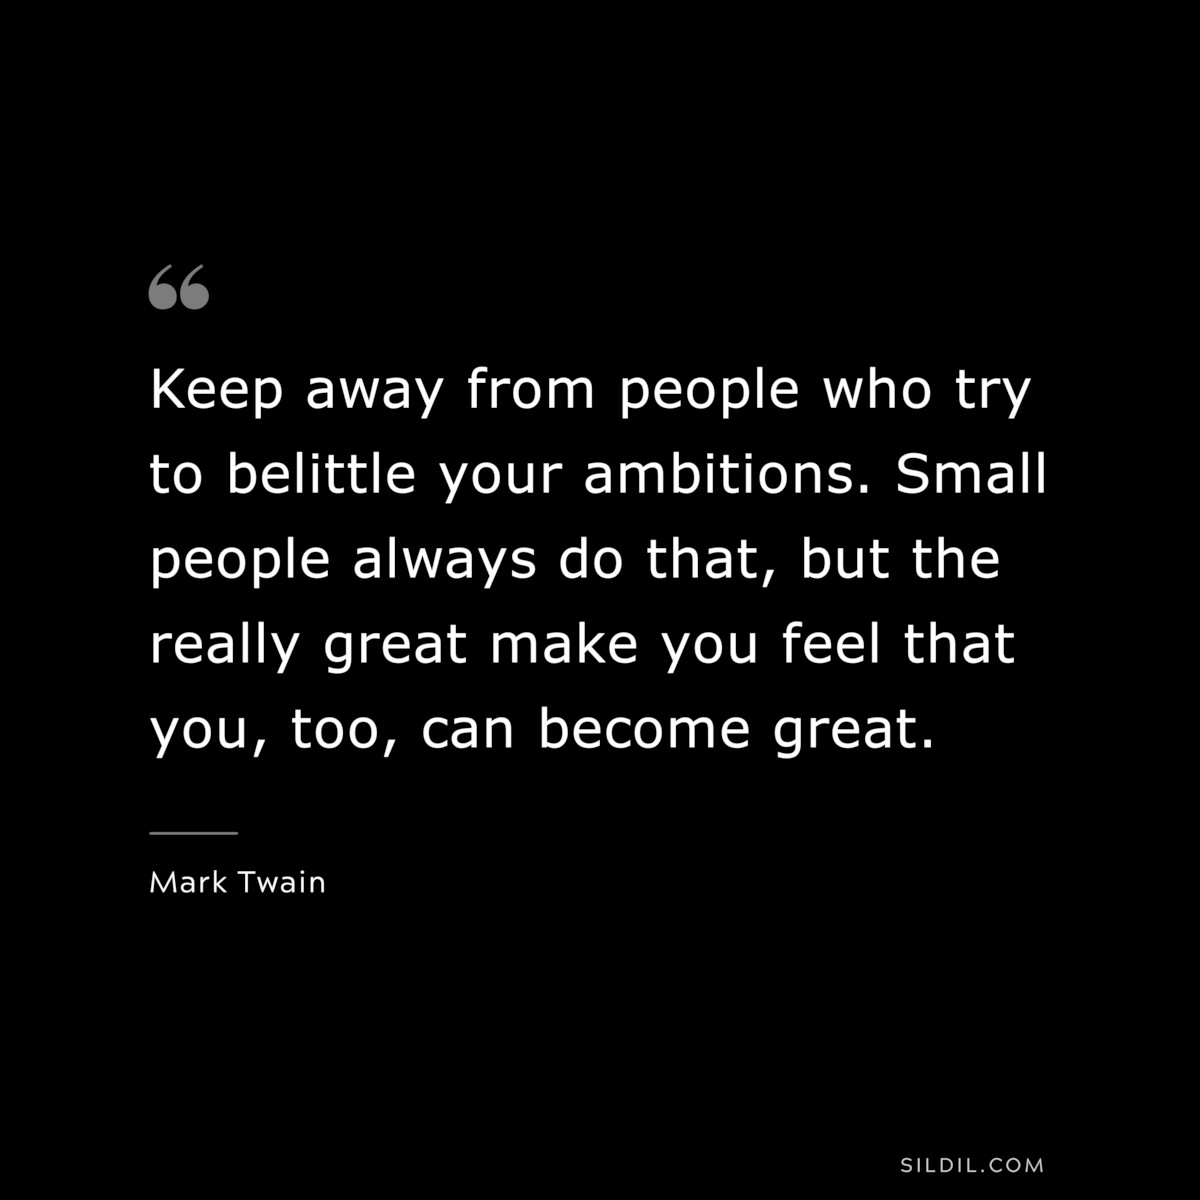 Keep away from people who try to belittle your ambitions. Small people always do that, but the really great make you feel that you, too, can become great. ― Mark Twain